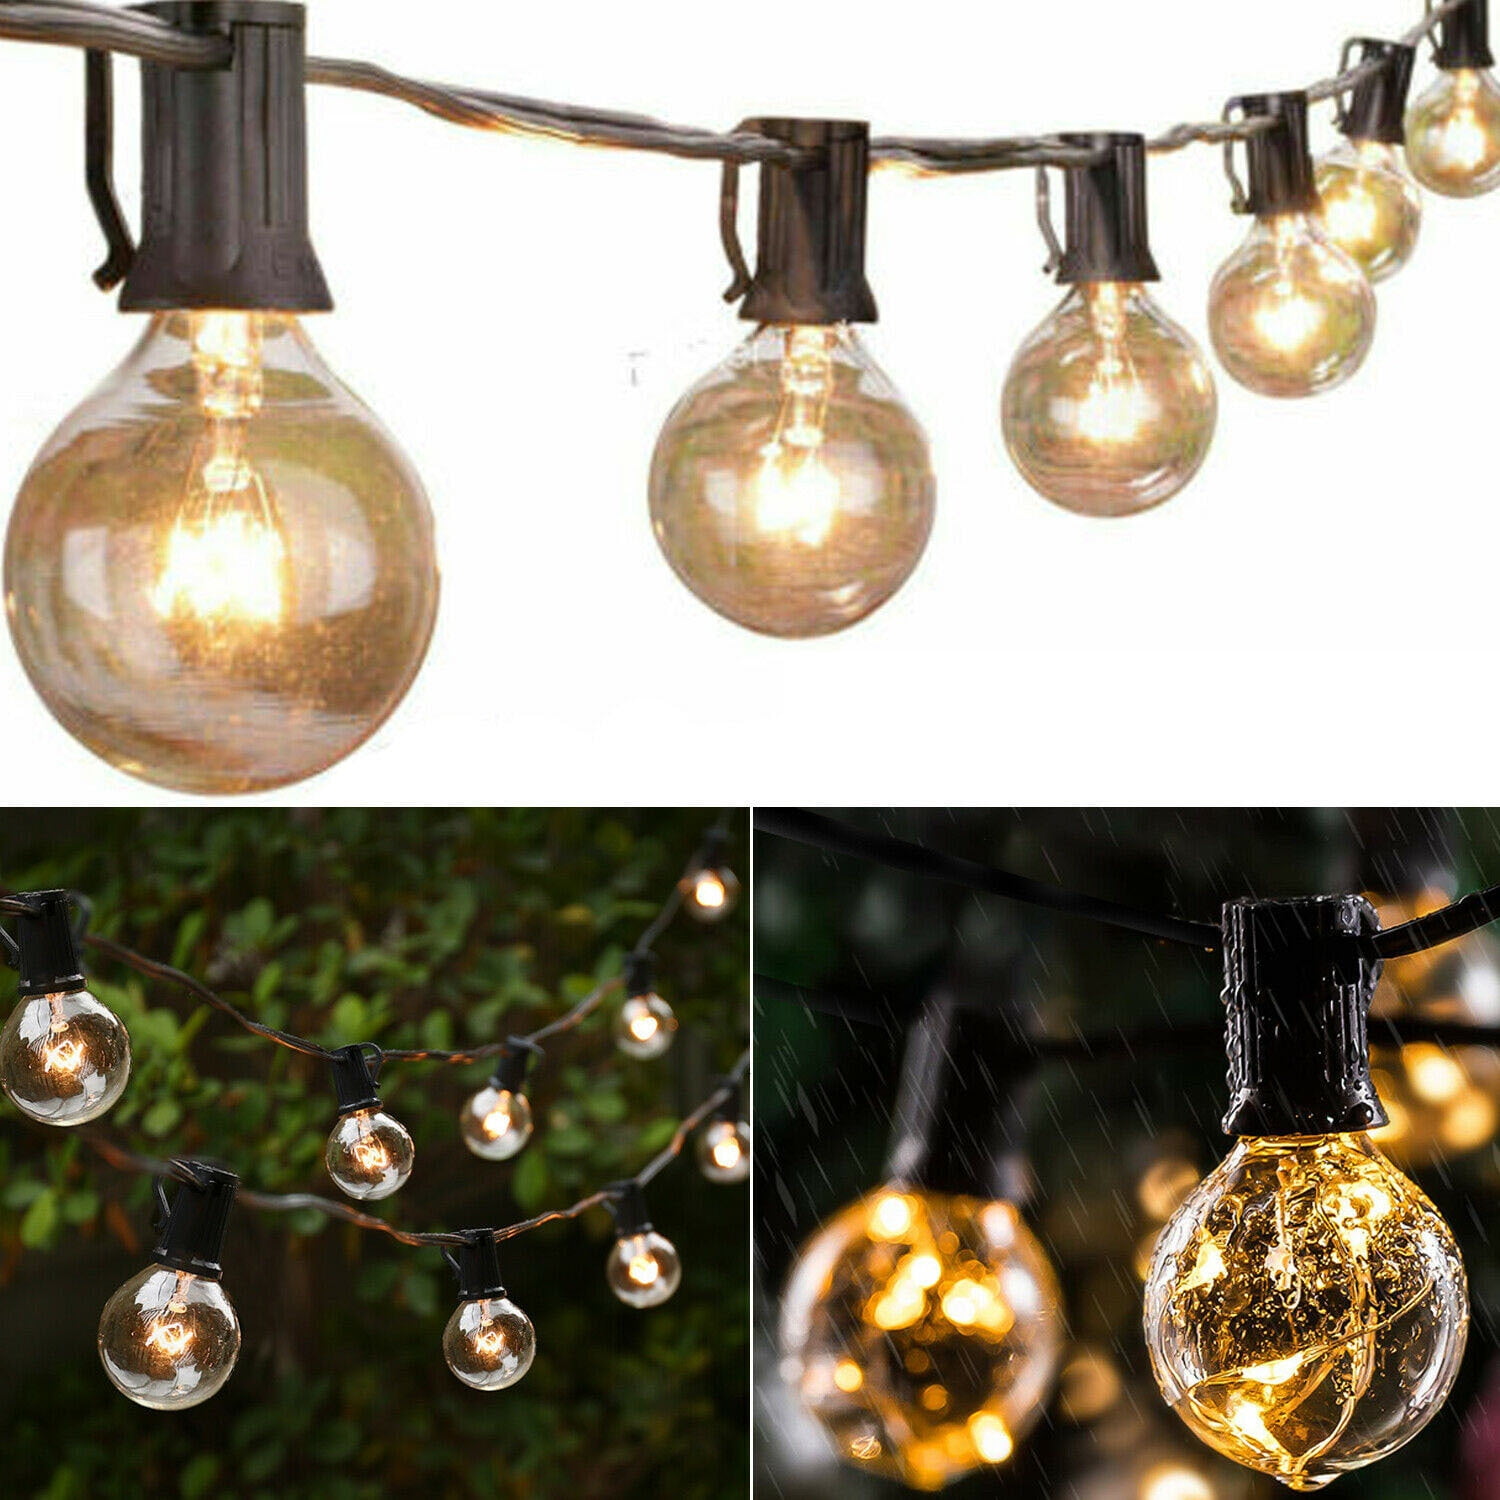 G40 LED Warm White Outdoor Patio Globe String Lights 25', 50' and 100' Lengths 